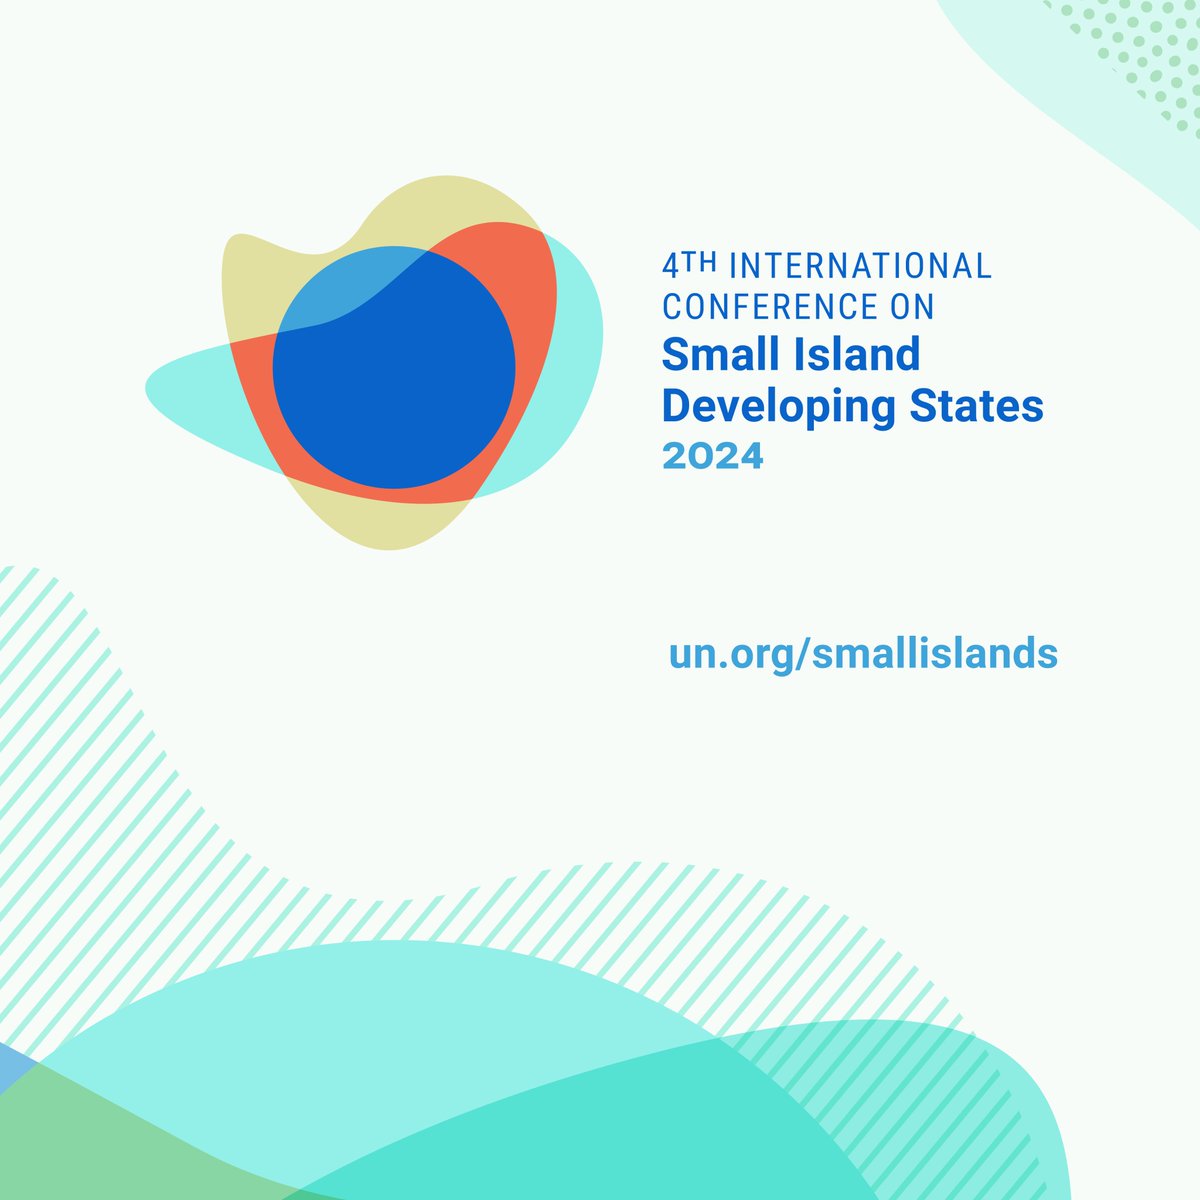 #SmallIslands 🏝️are home to more than 65 million people who live across more than 1,000 islands. #SIDS4 is about solving some of the most pressing challenges these communities face. Follow preparations for this major event. ⬇️ un.org/smallislands